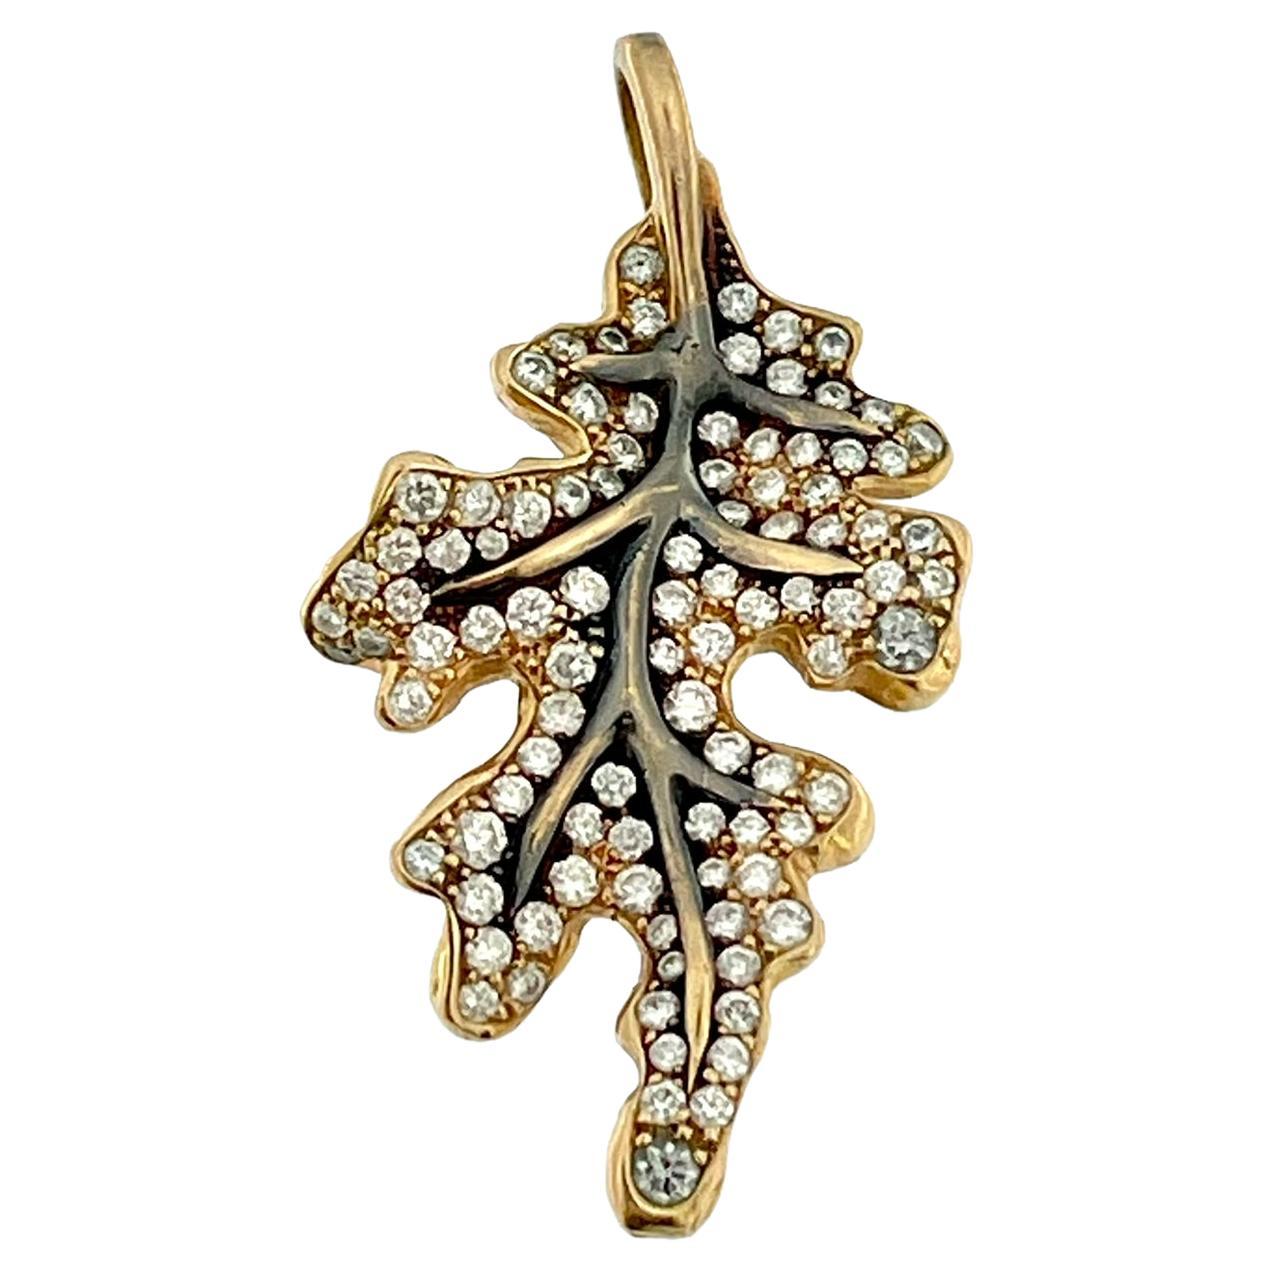 Leaf 18kt Yellow Gold, Black Oxidation and Diamonds